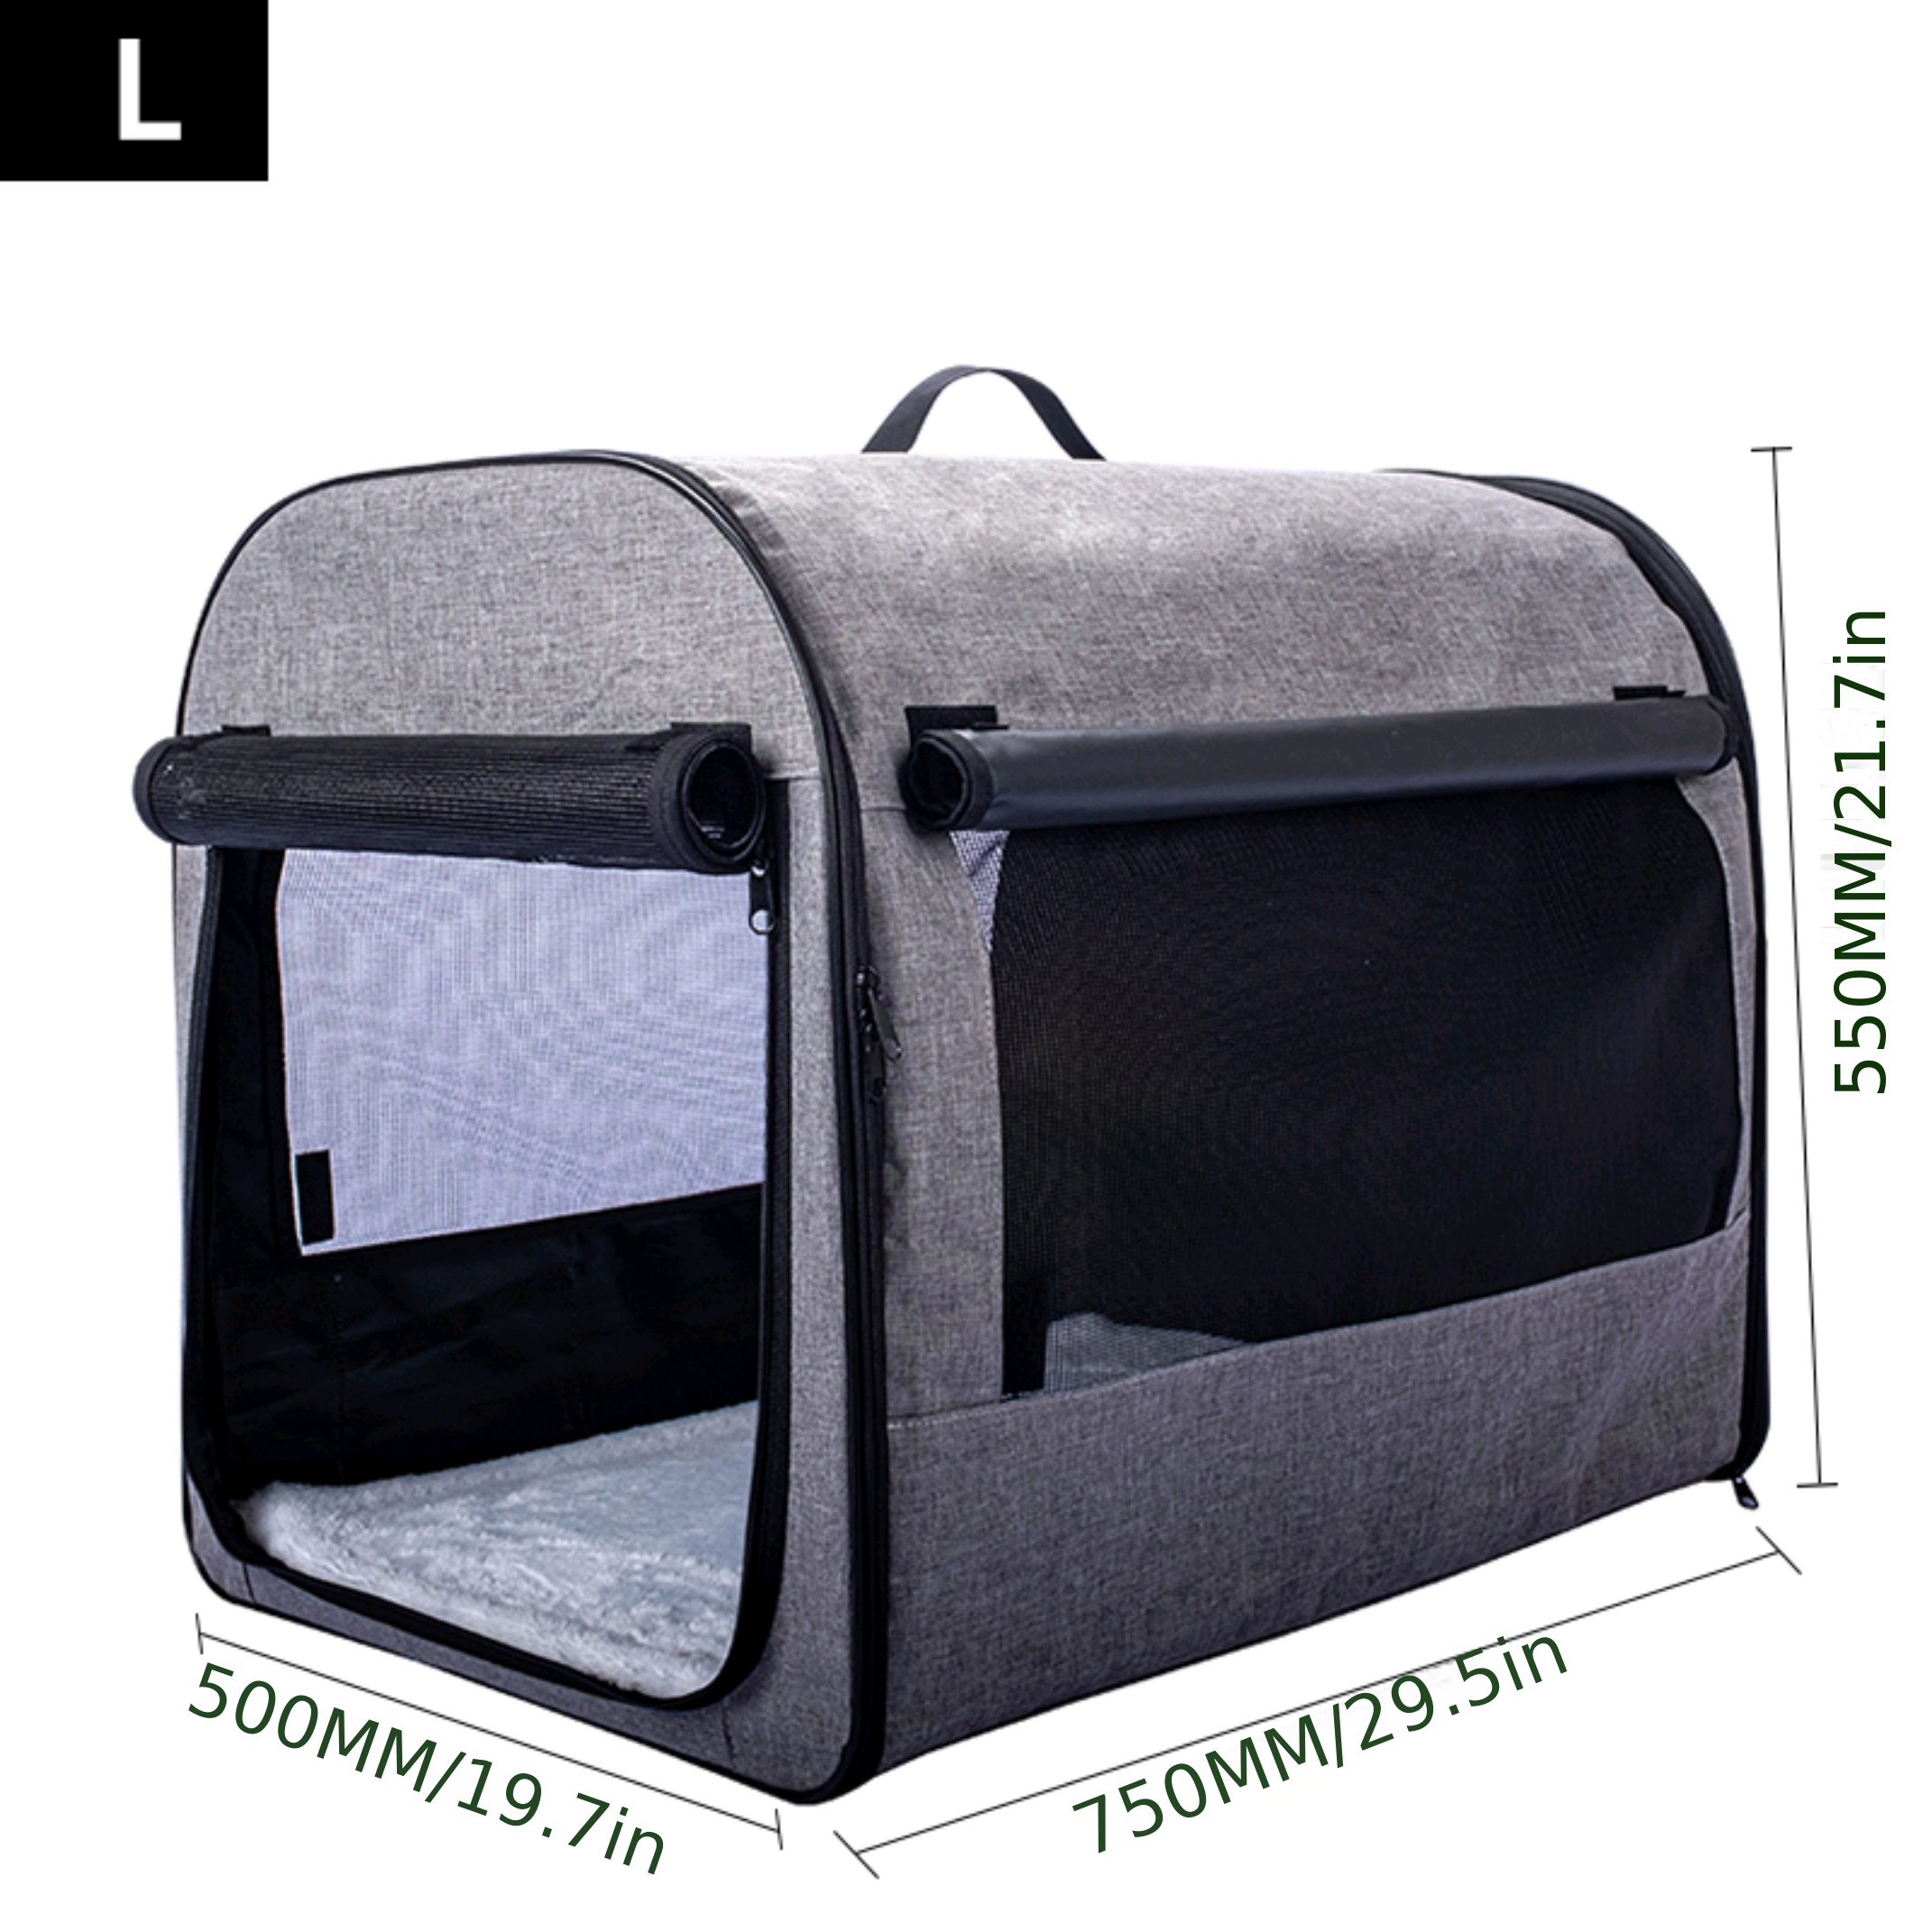 Gray Soft-Sided Pet Carrier